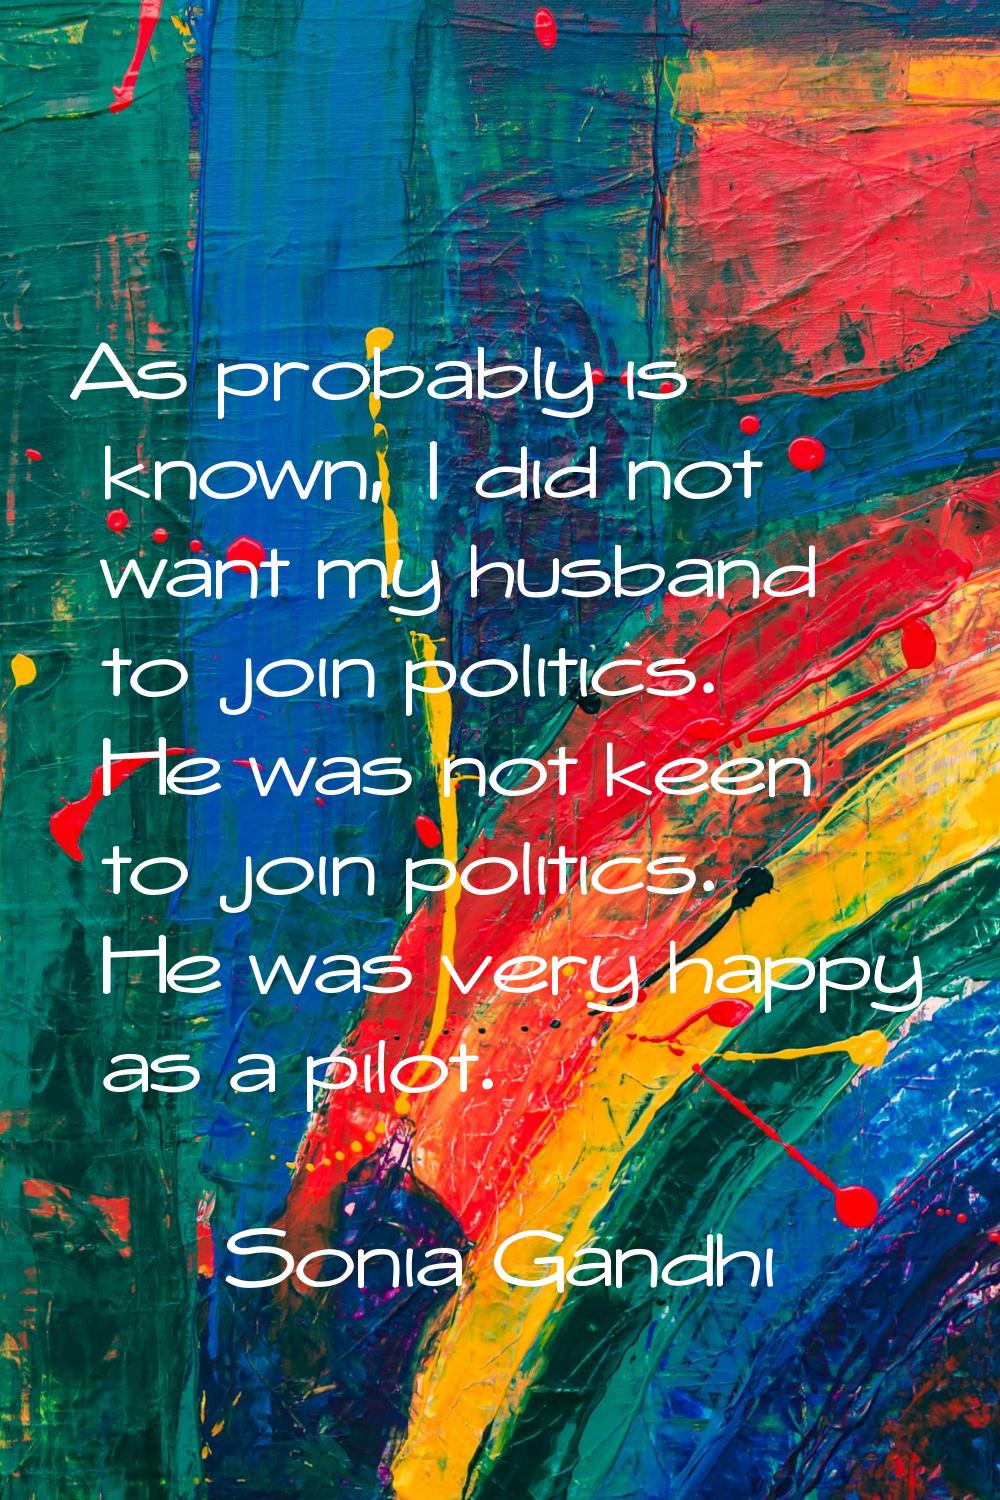 As probably is known, I did not want my husband to join politics. He was not keen to join politics.